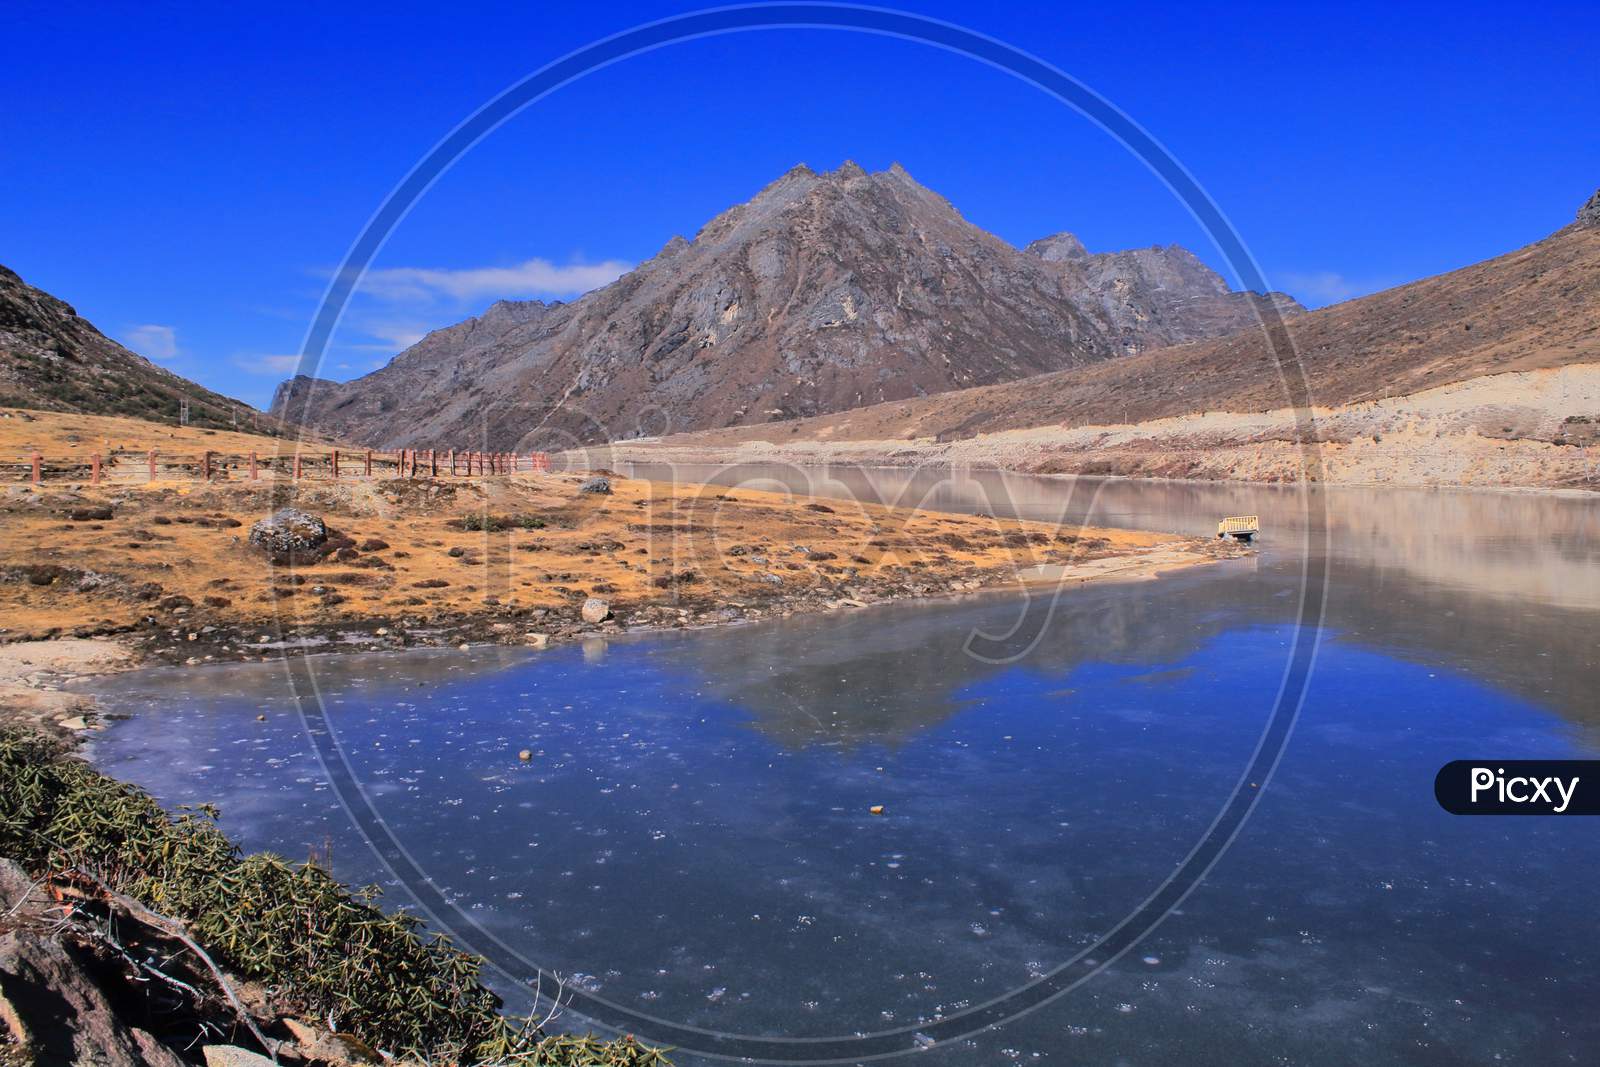 frozen sela lake with scenic alpine landscape, most popular tourist attraction of tawang the sela lake is located near sela pass in arunachal pradesh in india